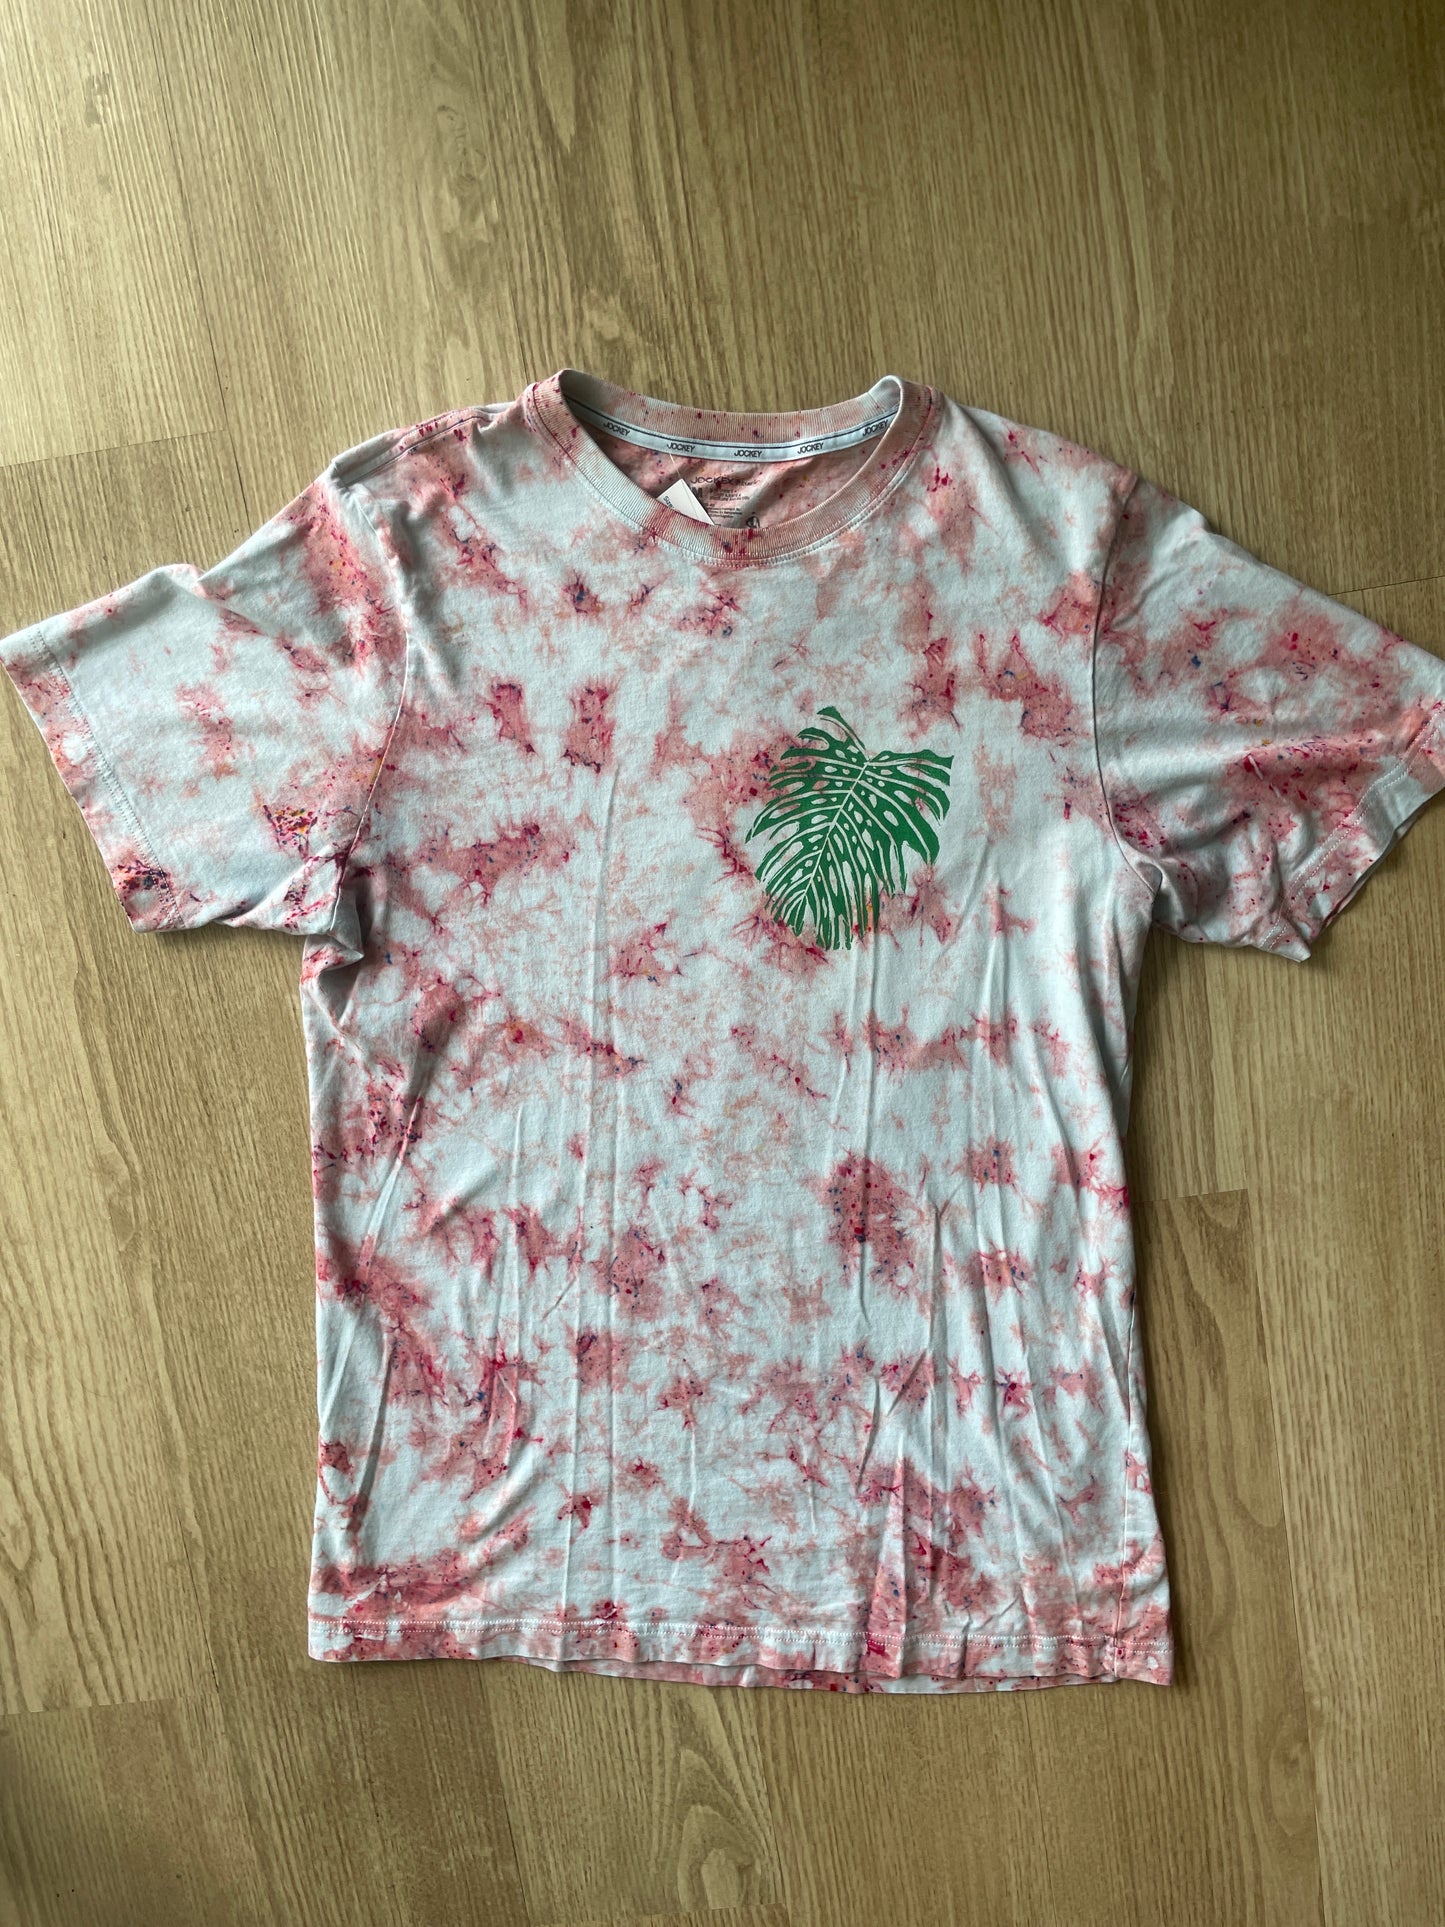 MEDIUM Men’s Monstera Leaf Tie Dye T-Shirt | One-Of-a-Kind Pastel Pink and White Crumpled Short Sleeve